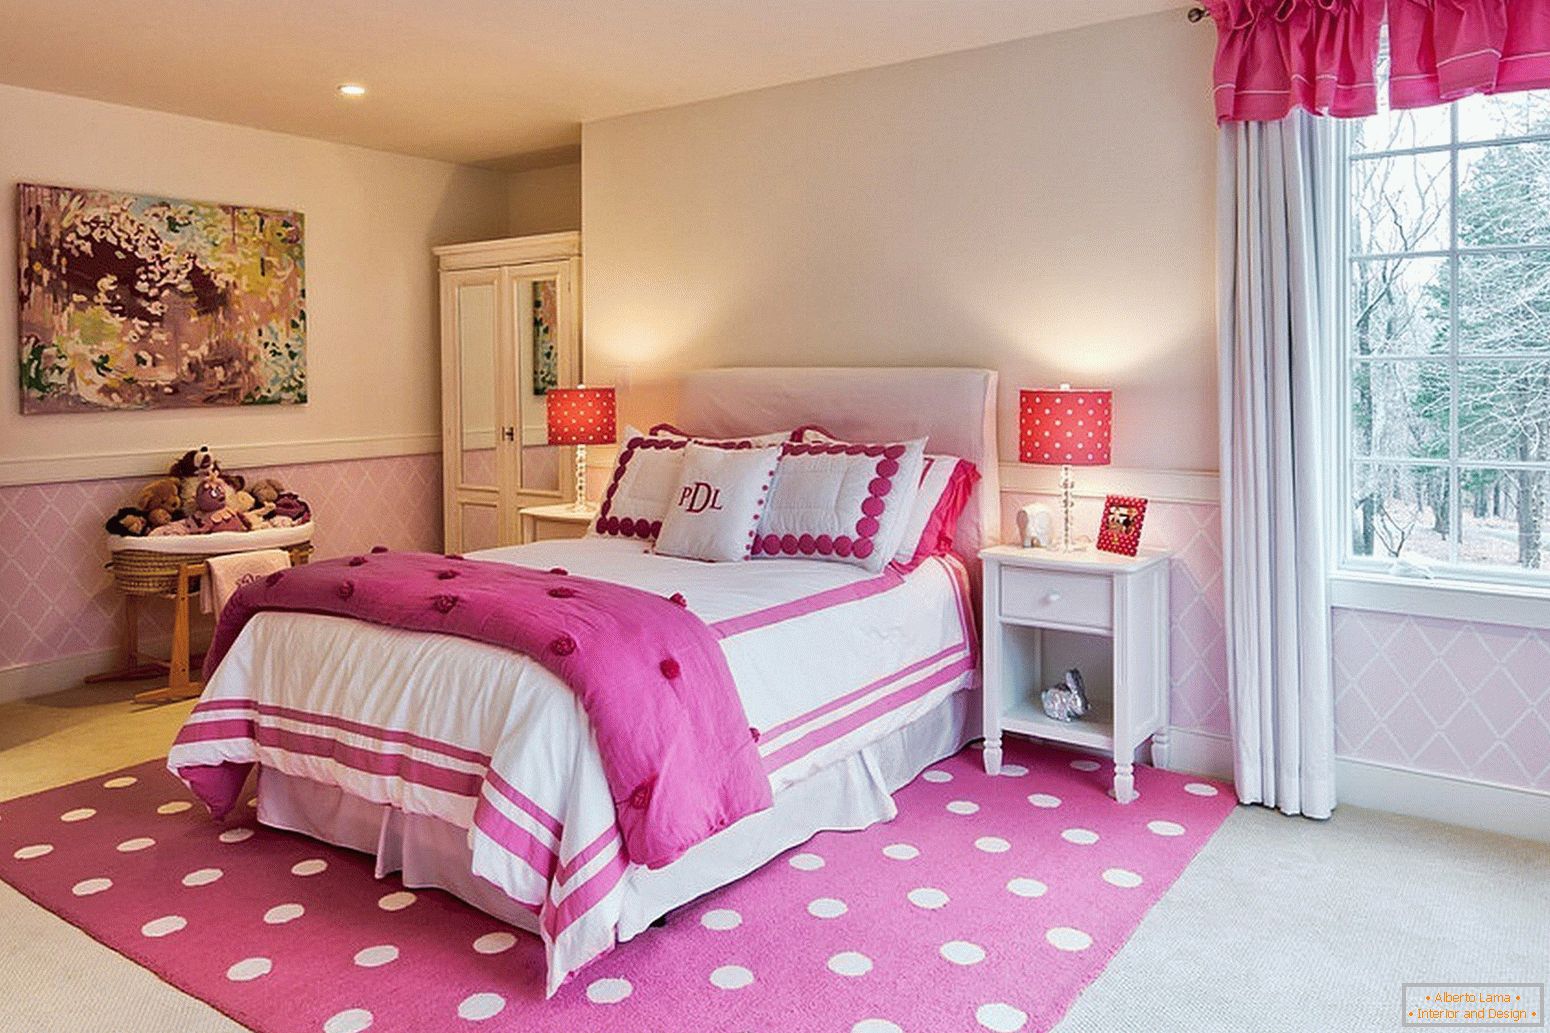 12 Year Old Girl Bedroom Decorating Ideas